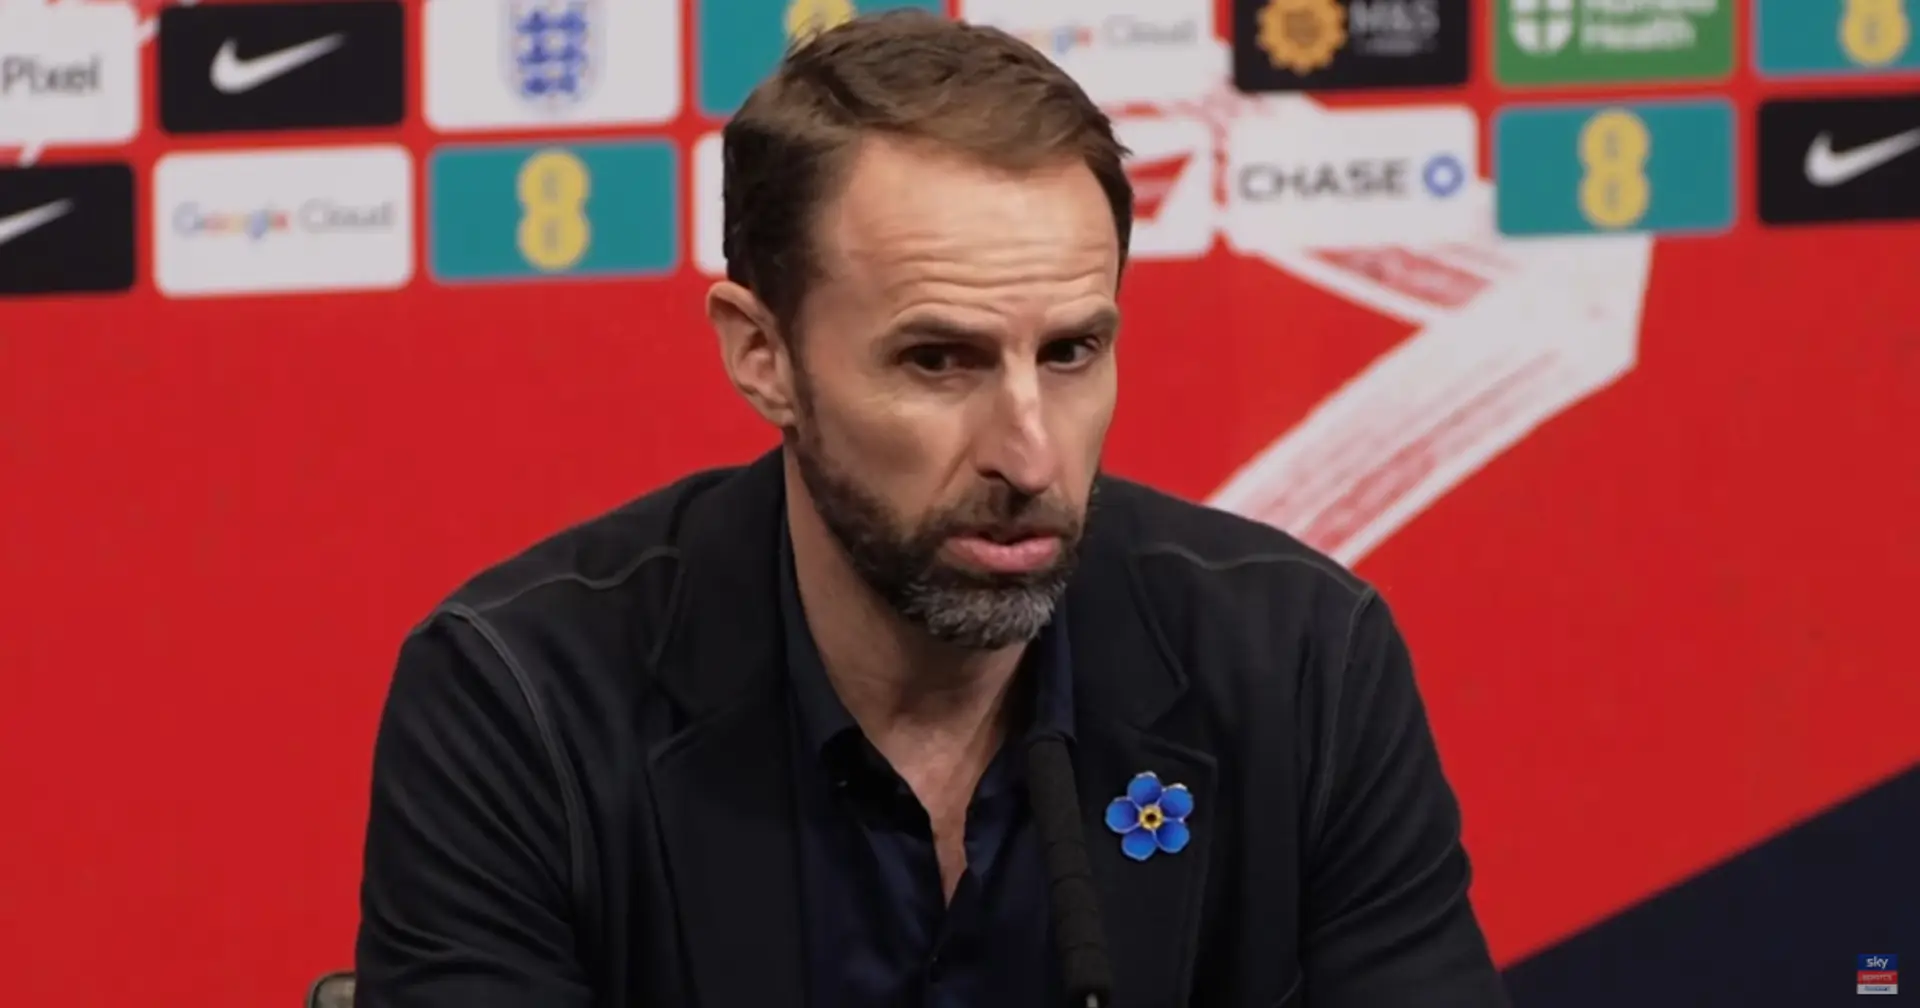 Gareth Southgate warns Rashford of England competition — four players battling for one spot